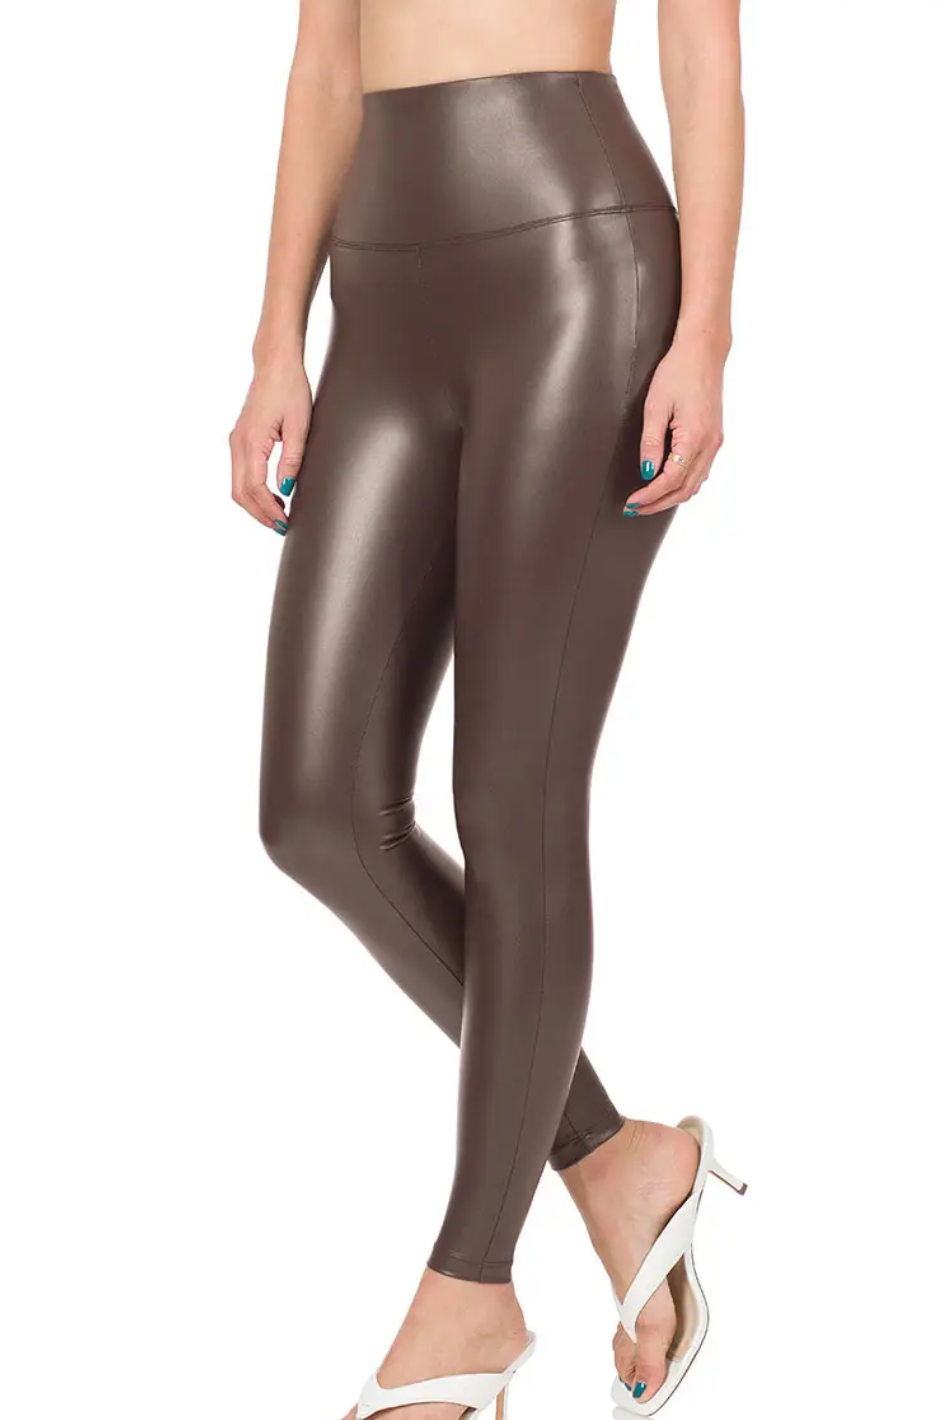 SPANX Women's Faux Leather Leggings, Wine, Small at  Women's